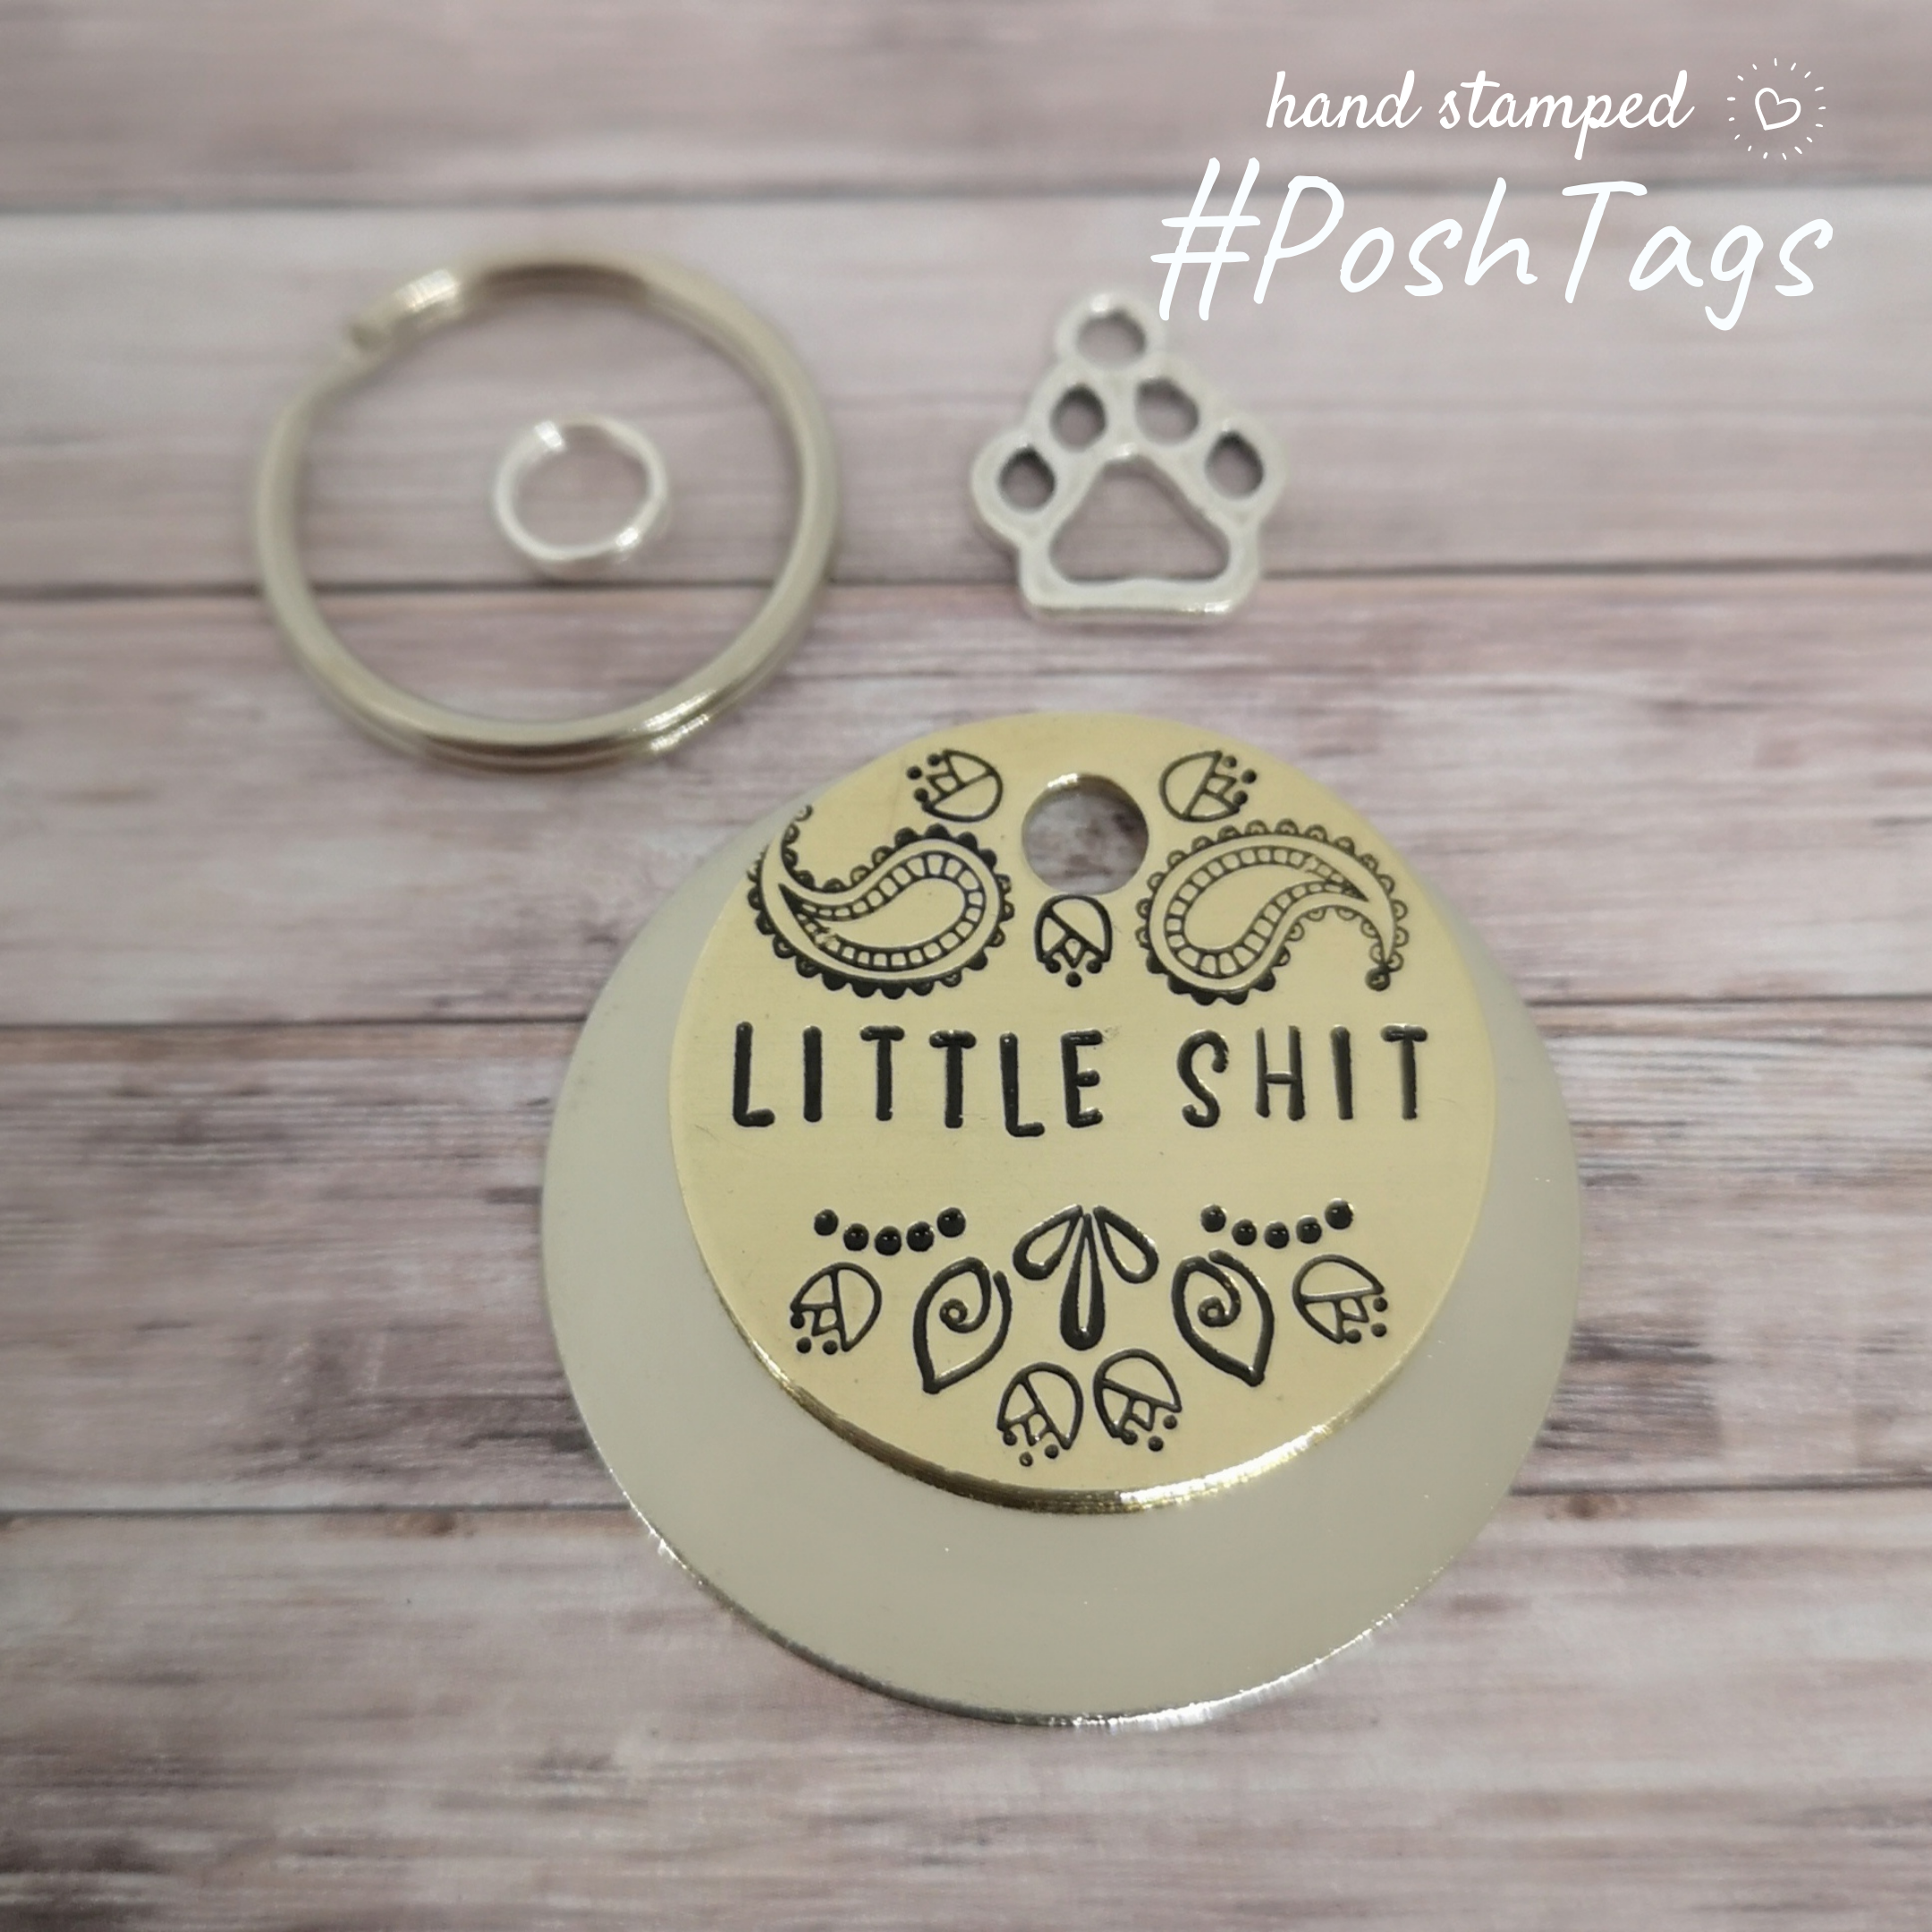 Little shit (or pet name/chipped) - 3 sizes - rude funny - hand stamped cat  dog pet collar ID tag